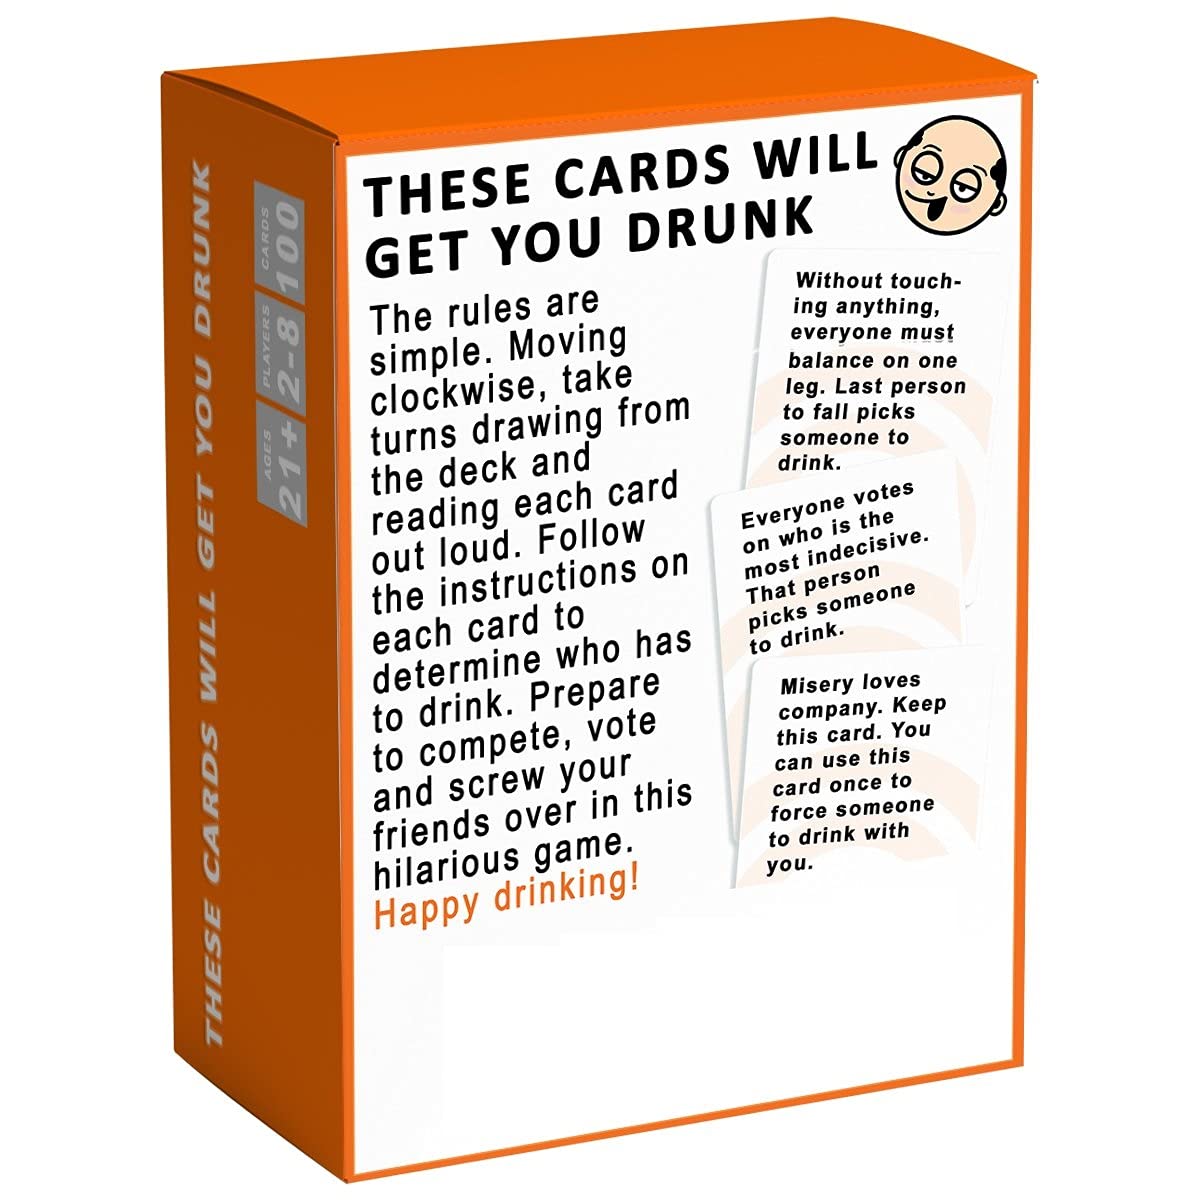 Tickles These Cards Will Get You Drunk - Fun Adult Drinking Game for Parties